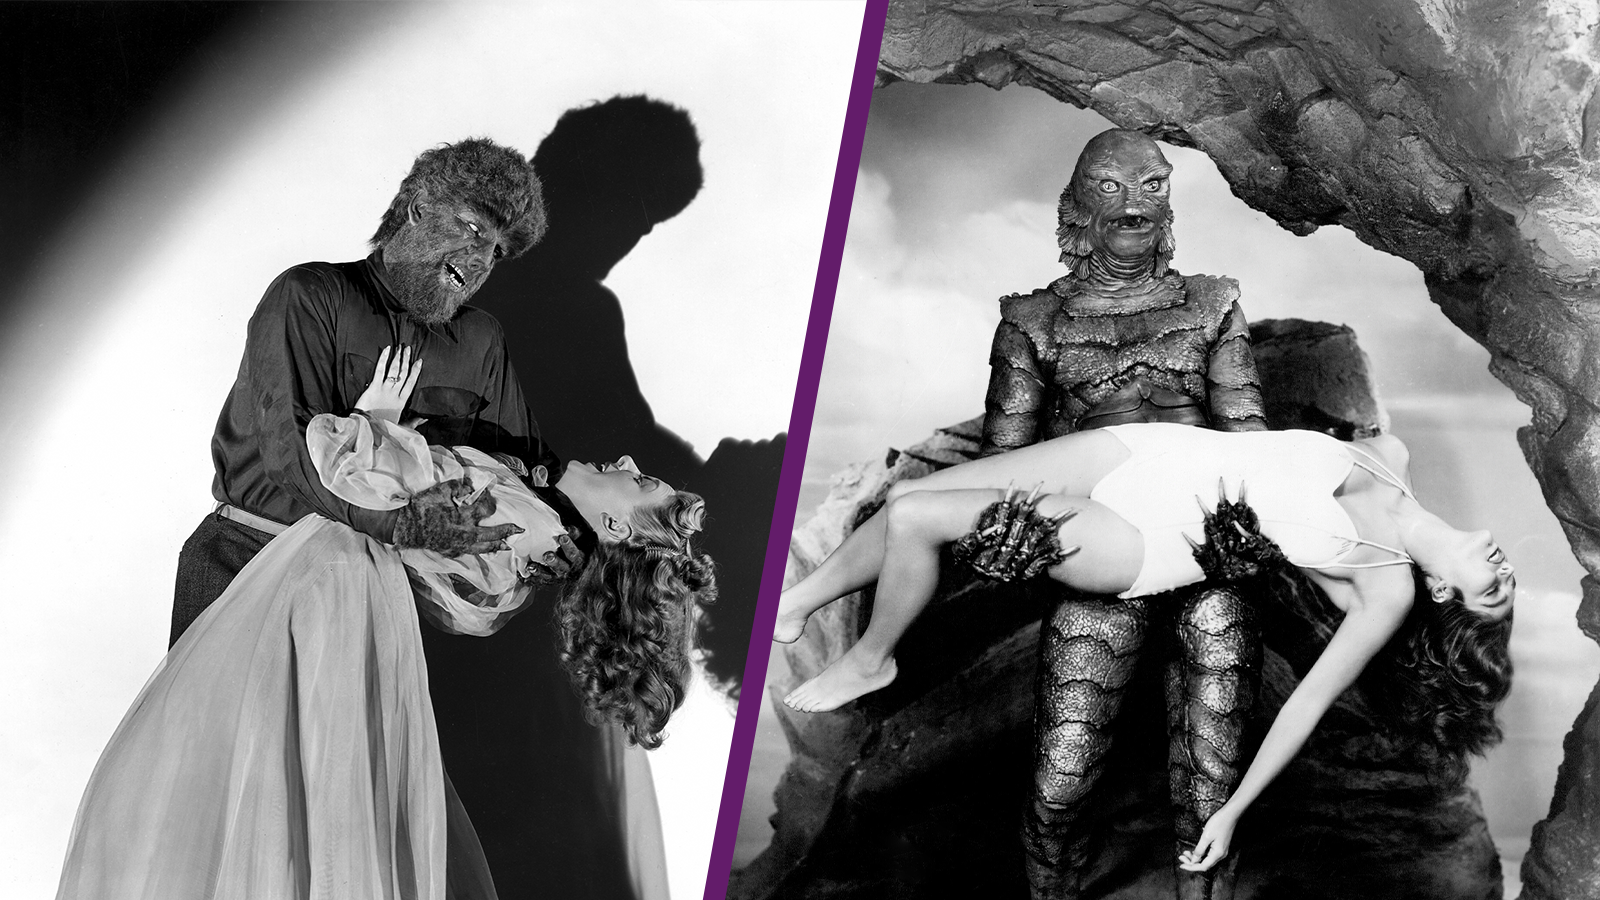 The Wolf Man & Creature from the Black Lagoon in 3D (Double Feature)